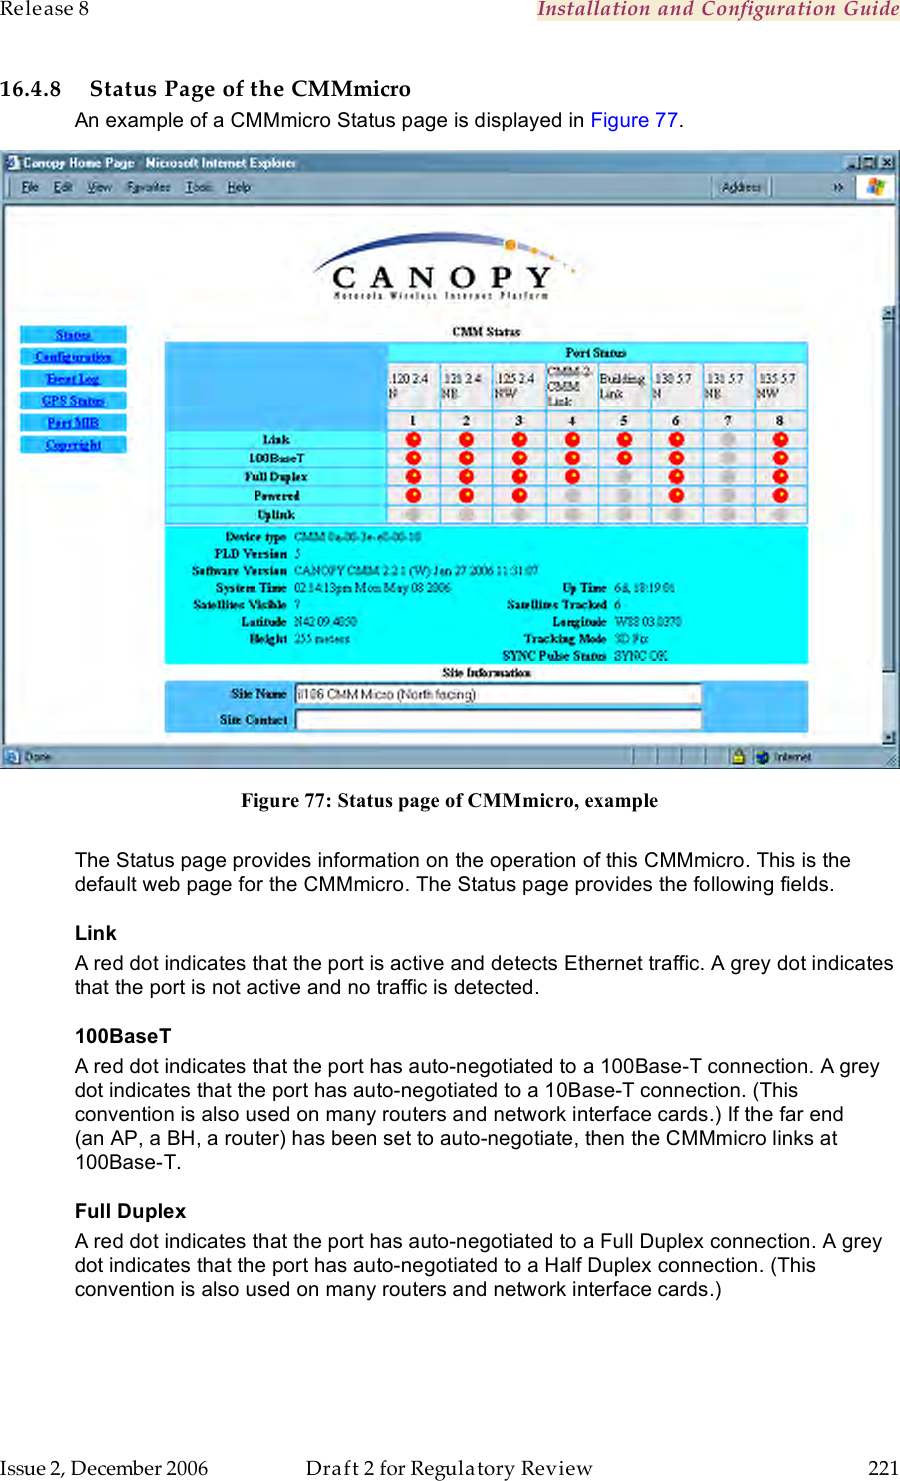 Release 8    Installation and Configuration Guide   Issue 2, December 2006  Draft 2 for Regulatory Review  221     16.4.8 Status Page of the CMMmicro An example of a CMMmicro Status page is displayed in Figure 77.  Figure 77: Status page of CMMmicro, example  The Status page provides information on the operation of this CMMmicro. This is the default web page for the CMMmicro. The Status page provides the following fields. Link A red dot indicates that the port is active and detects Ethernet traffic. A grey dot indicates that the port is not active and no traffic is detected. 100BaseT A red dot indicates that the port has auto-negotiated to a 100Base-T connection. A grey dot indicates that the port has auto-negotiated to a 10Base-T connection. (This convention is also used on many routers and network interface cards.) If the far end  (an AP, a BH, a router) has been set to auto-negotiate, then the CMMmicro links at  100Base-T. Full Duplex A red dot indicates that the port has auto-negotiated to a Full Duplex connection. A grey dot indicates that the port has auto-negotiated to a Half Duplex connection. (This convention is also used on many routers and network interface cards.) 